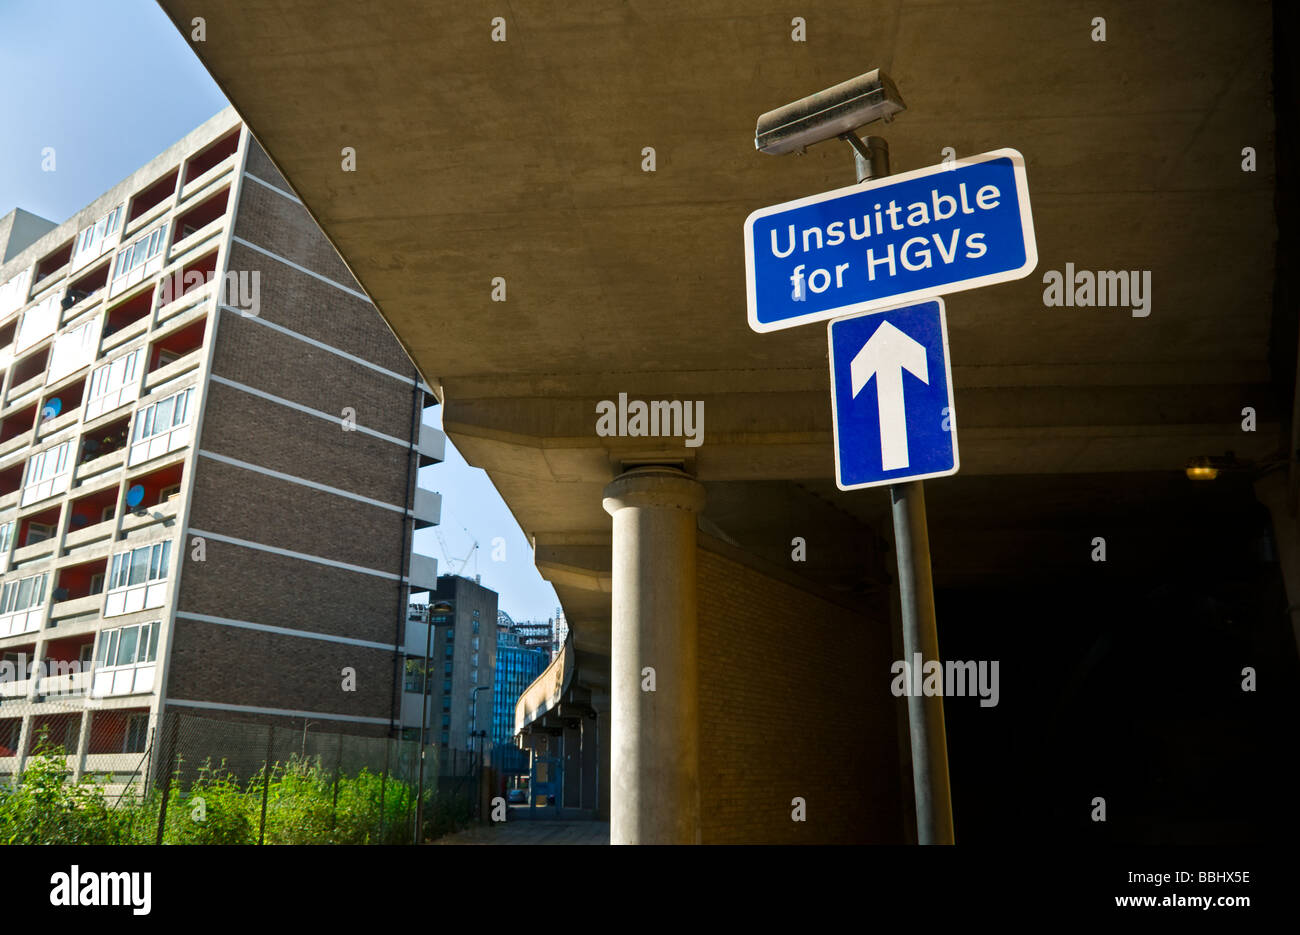 Inner City road sign 'Unsuitable for HGVs' in narrow busy urban environment with apartment blocks and office buildings behind Stock Photo